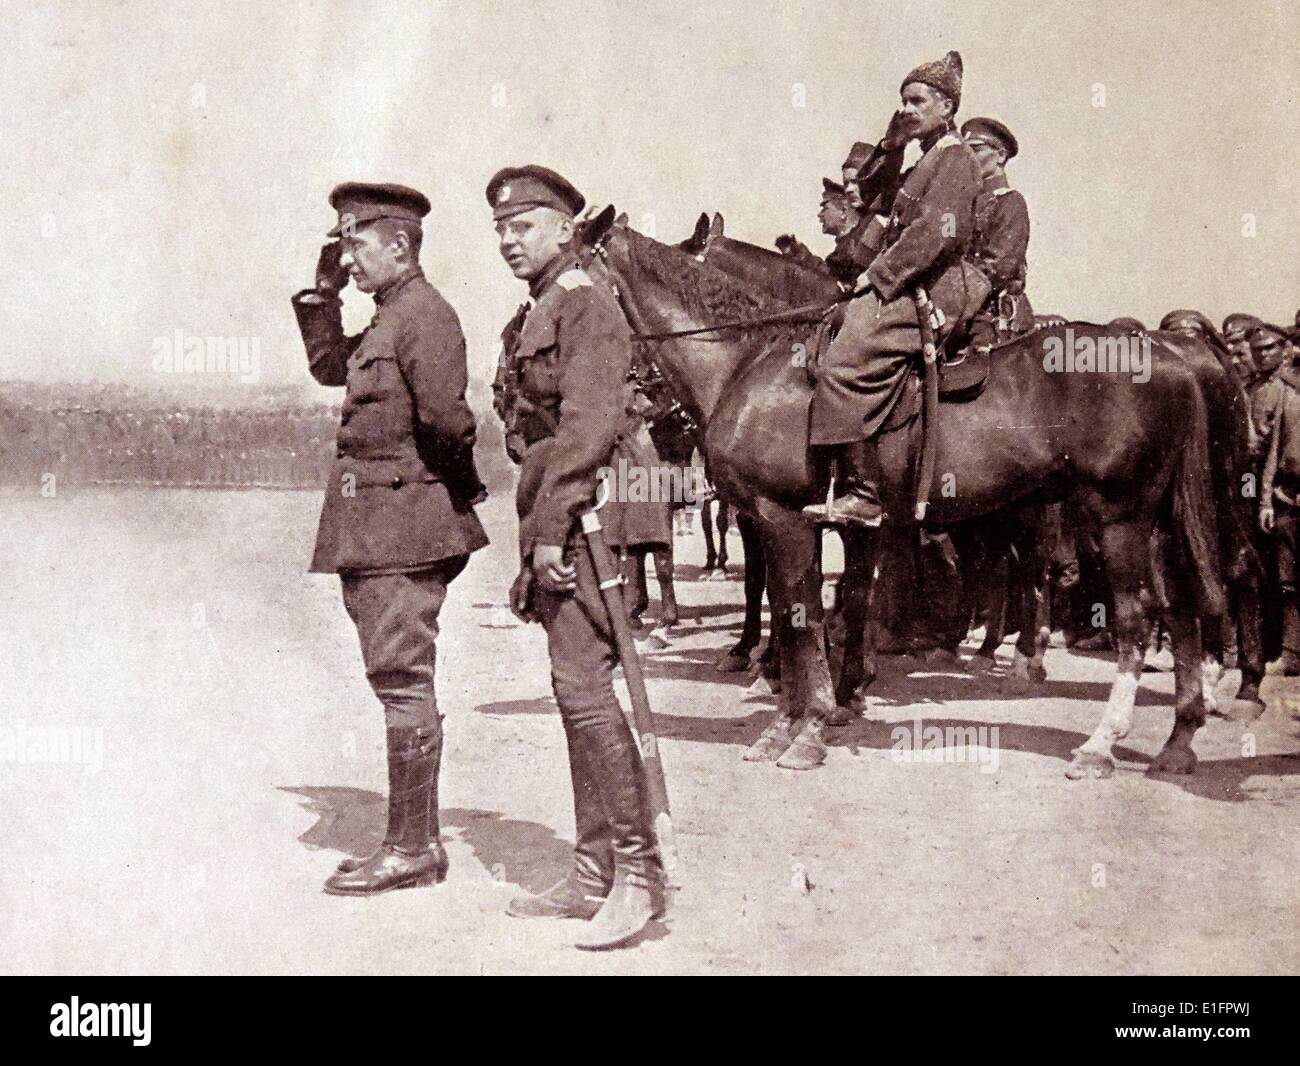 Photograph of Alexander Kerensky (1881 - 1970) the Russian Minister of War (and later Prime Minister of Russia) saluting troops during the Russian Revolution. Dated 1916 Stock Photo